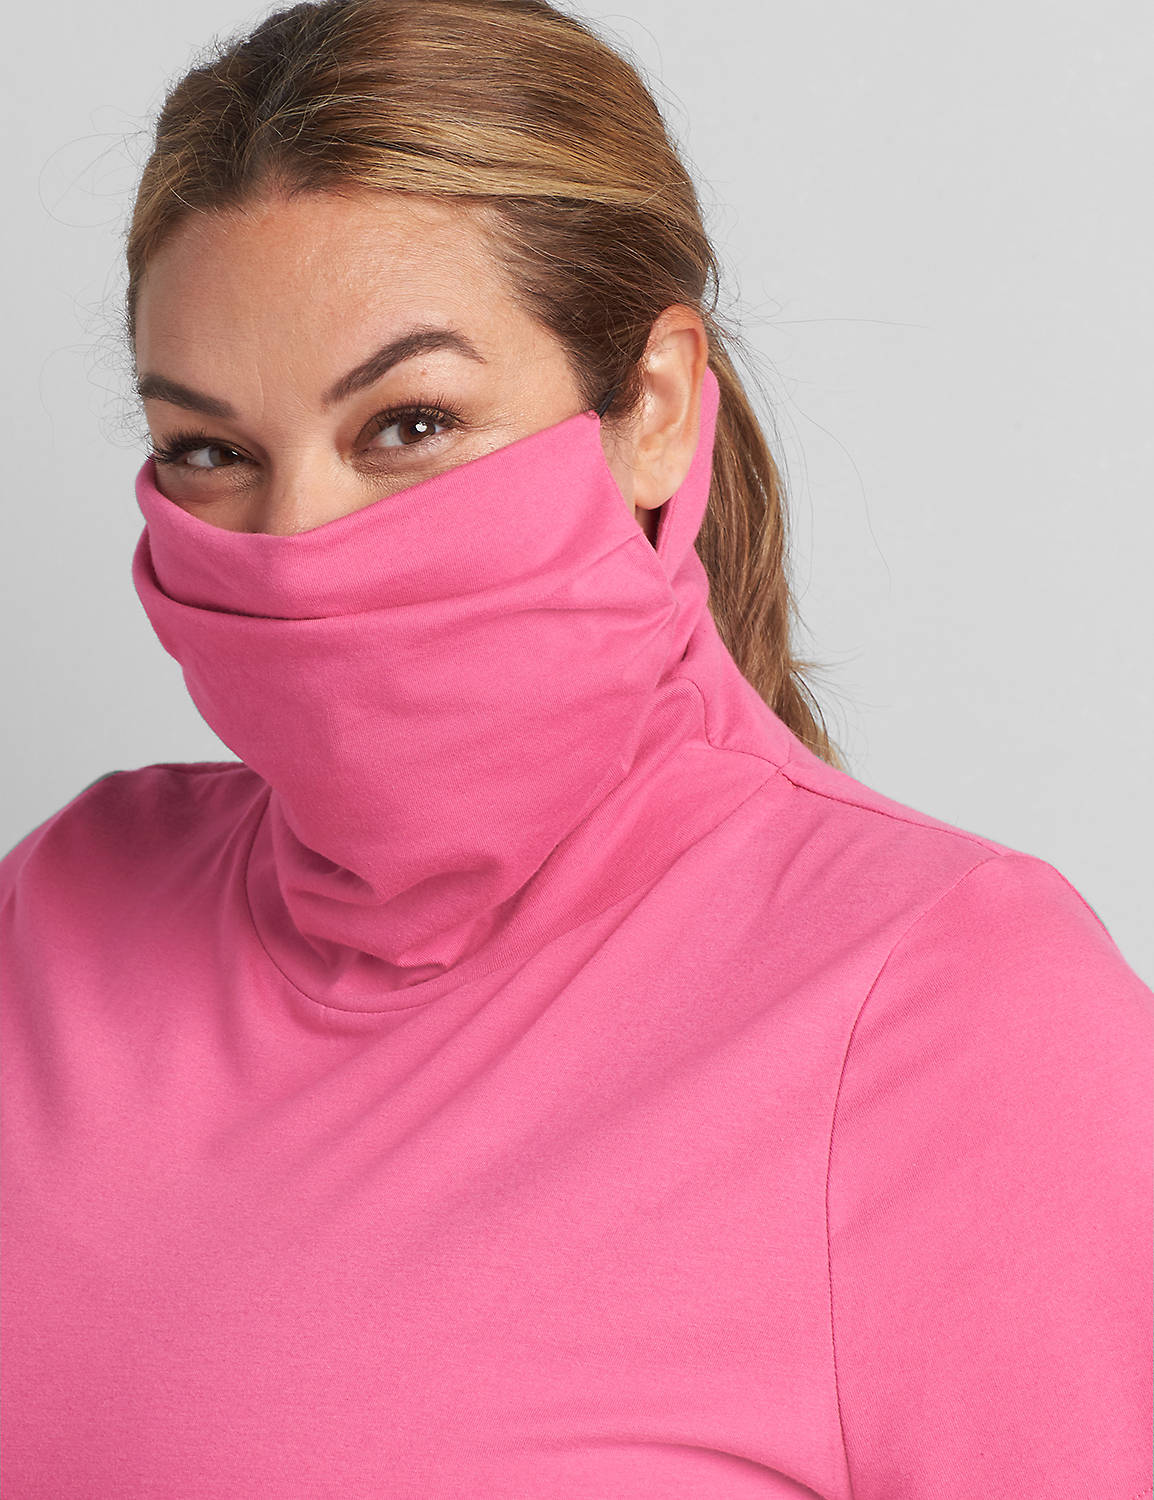 Short Sleeve Cowl Mask Top S 1119372:Bold Pink 62-0005-15:26/28 Product Image 4